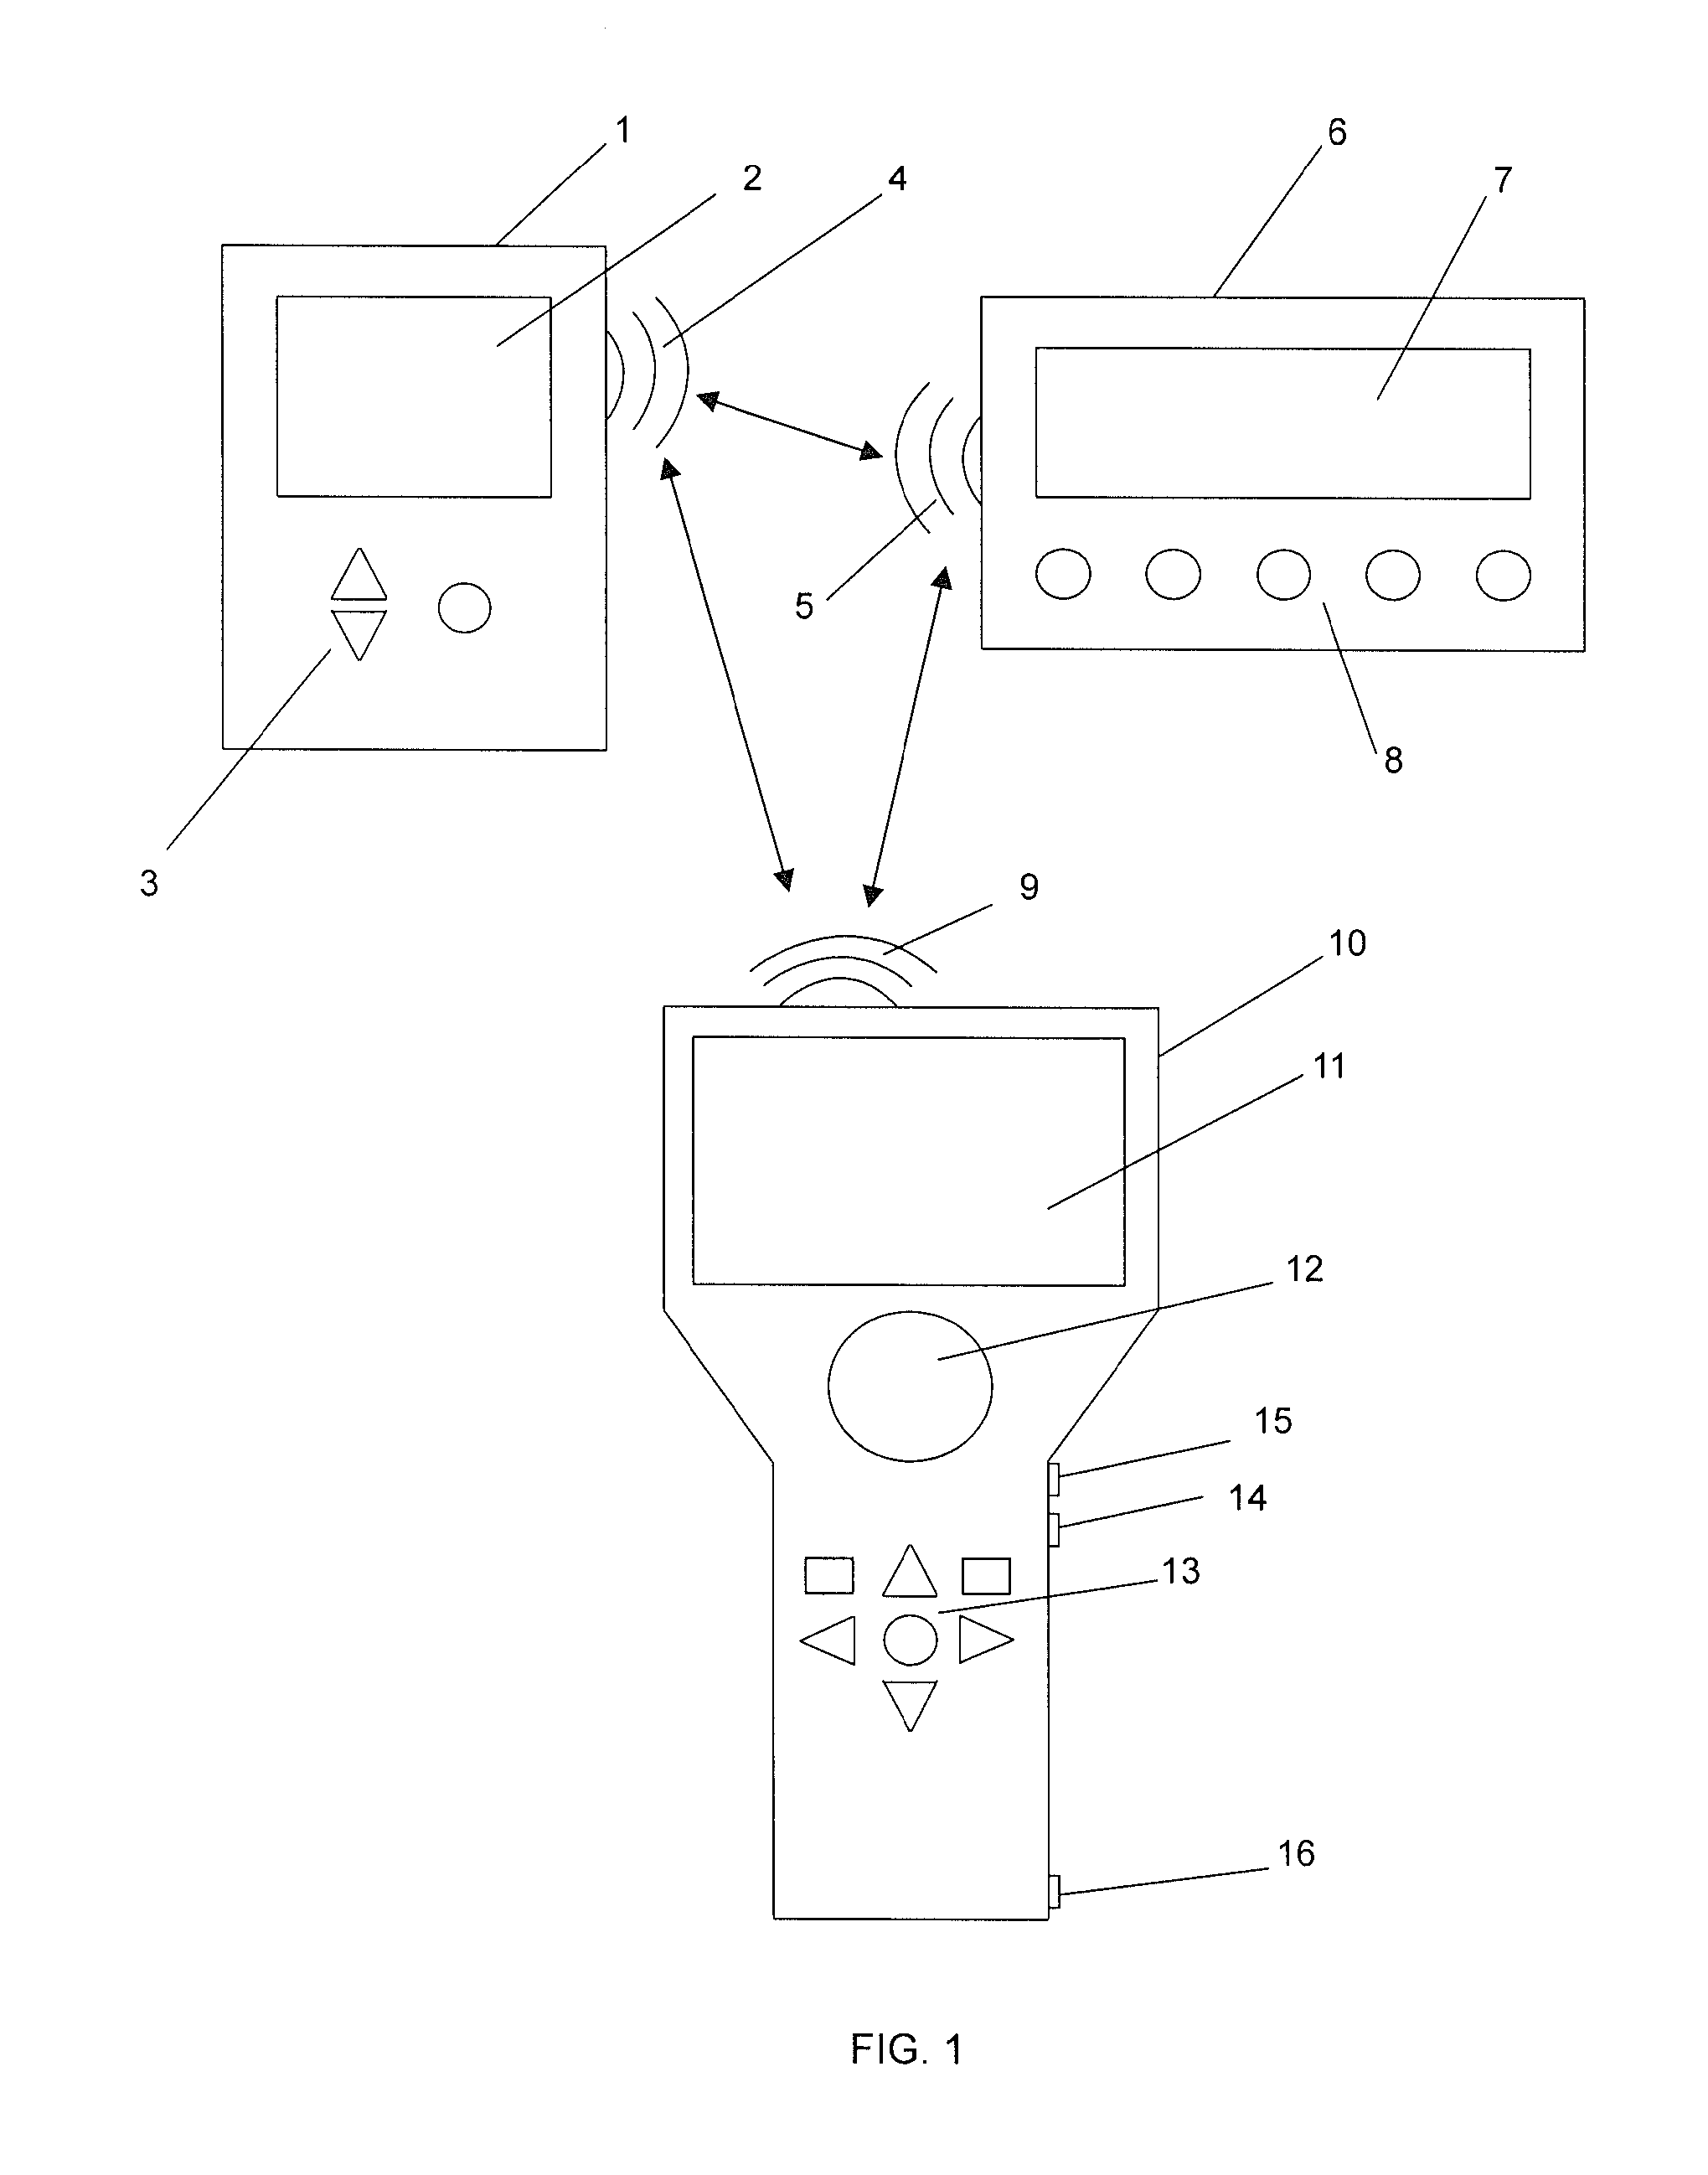 Remote control device for use with insulin infusion systems